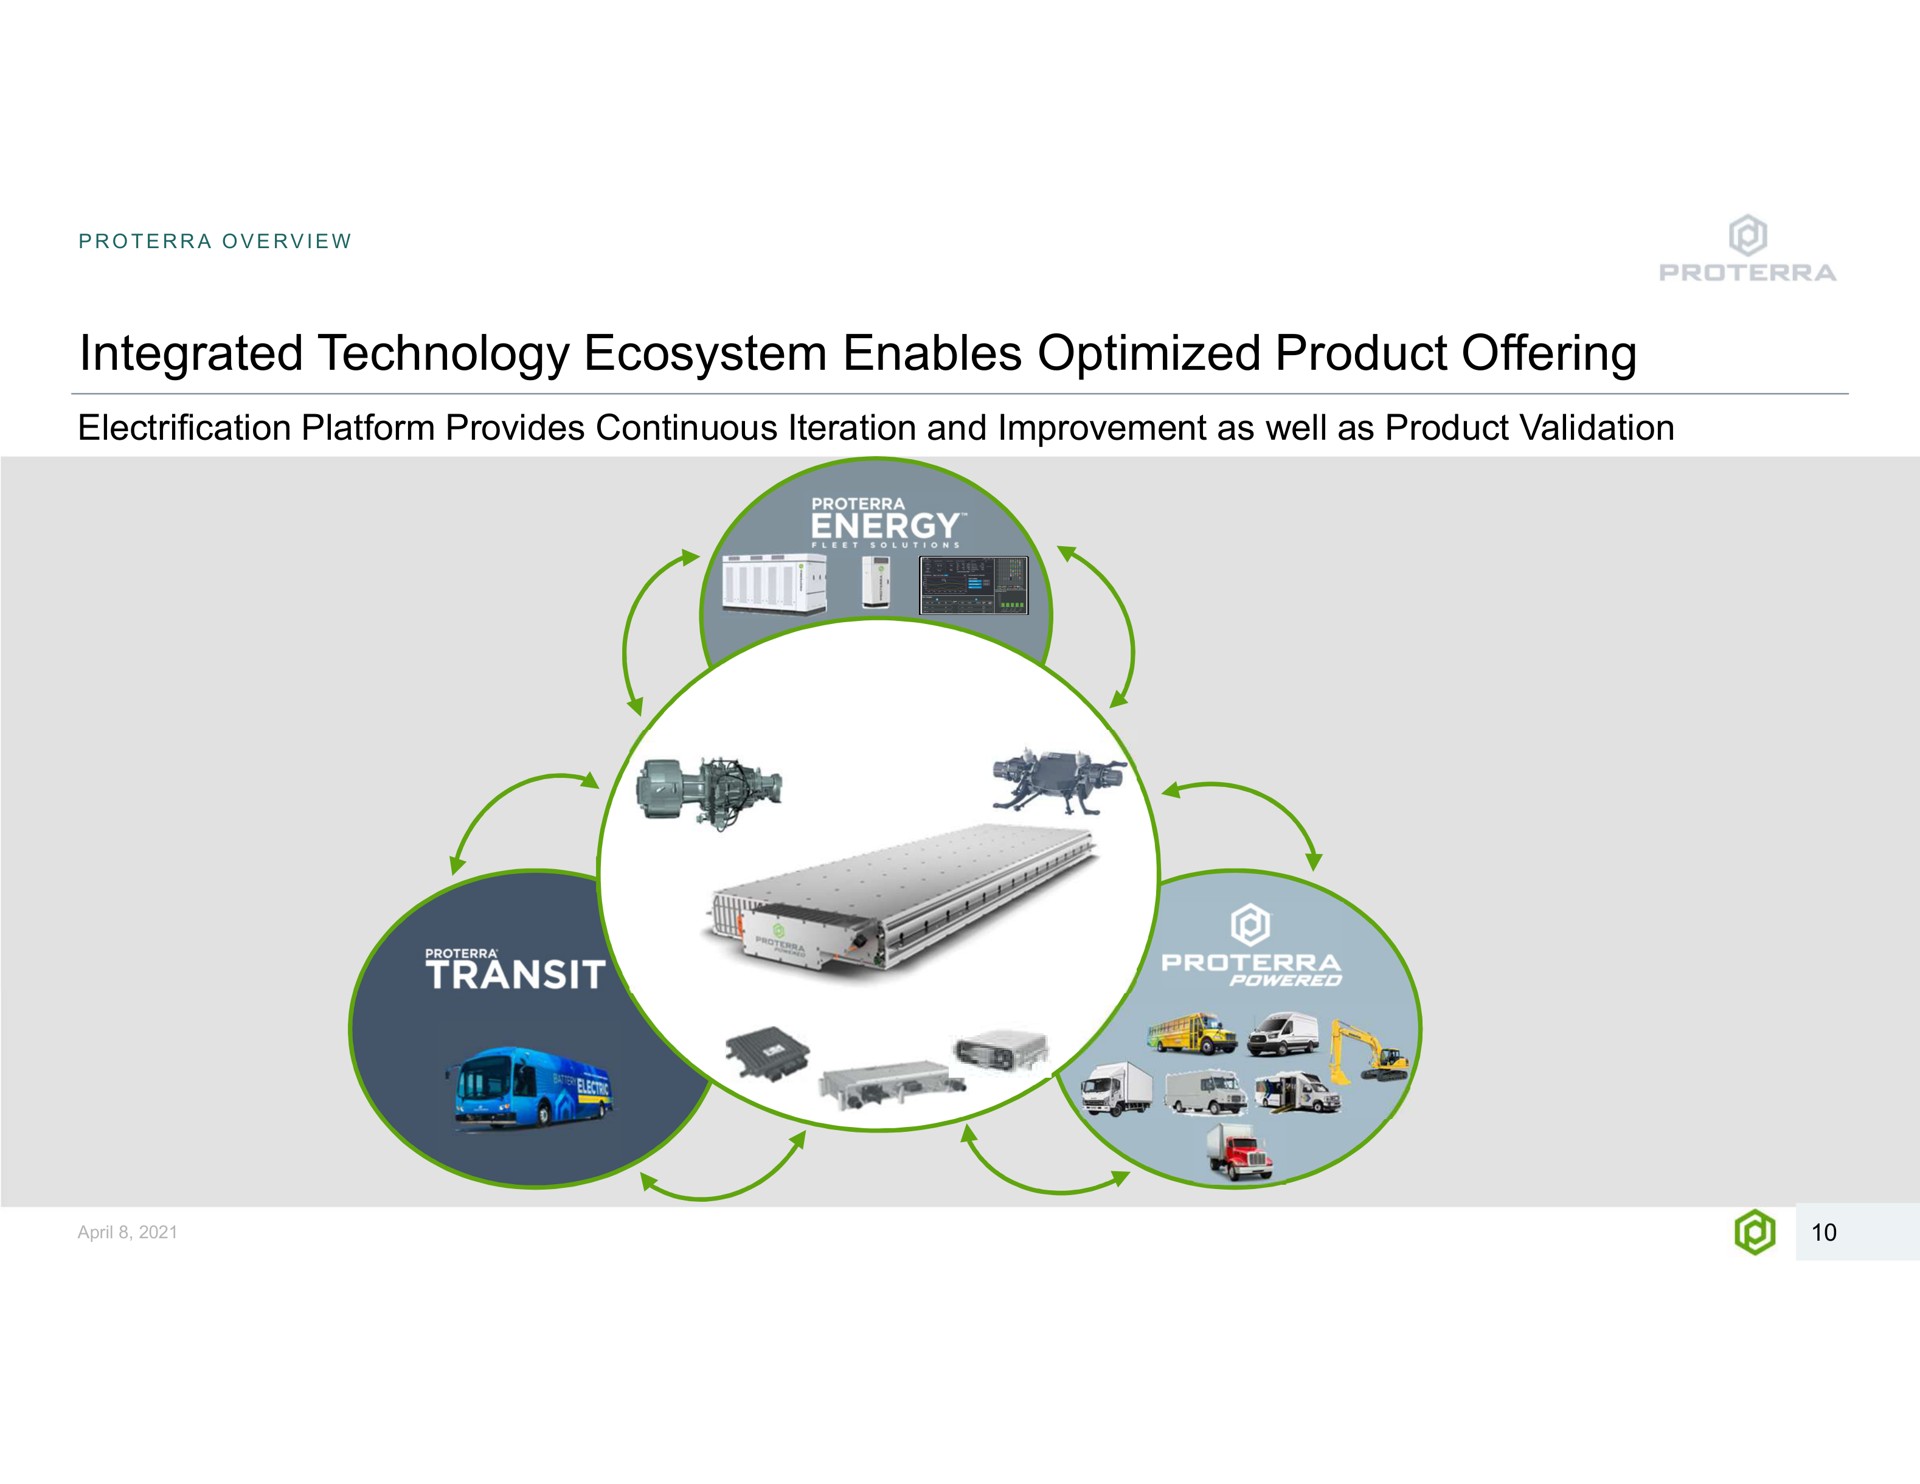 integrated technology ecosystem enables optimized product offering overview electrification platform provides continuous iteration and improvement as well as validation energy | Proterra